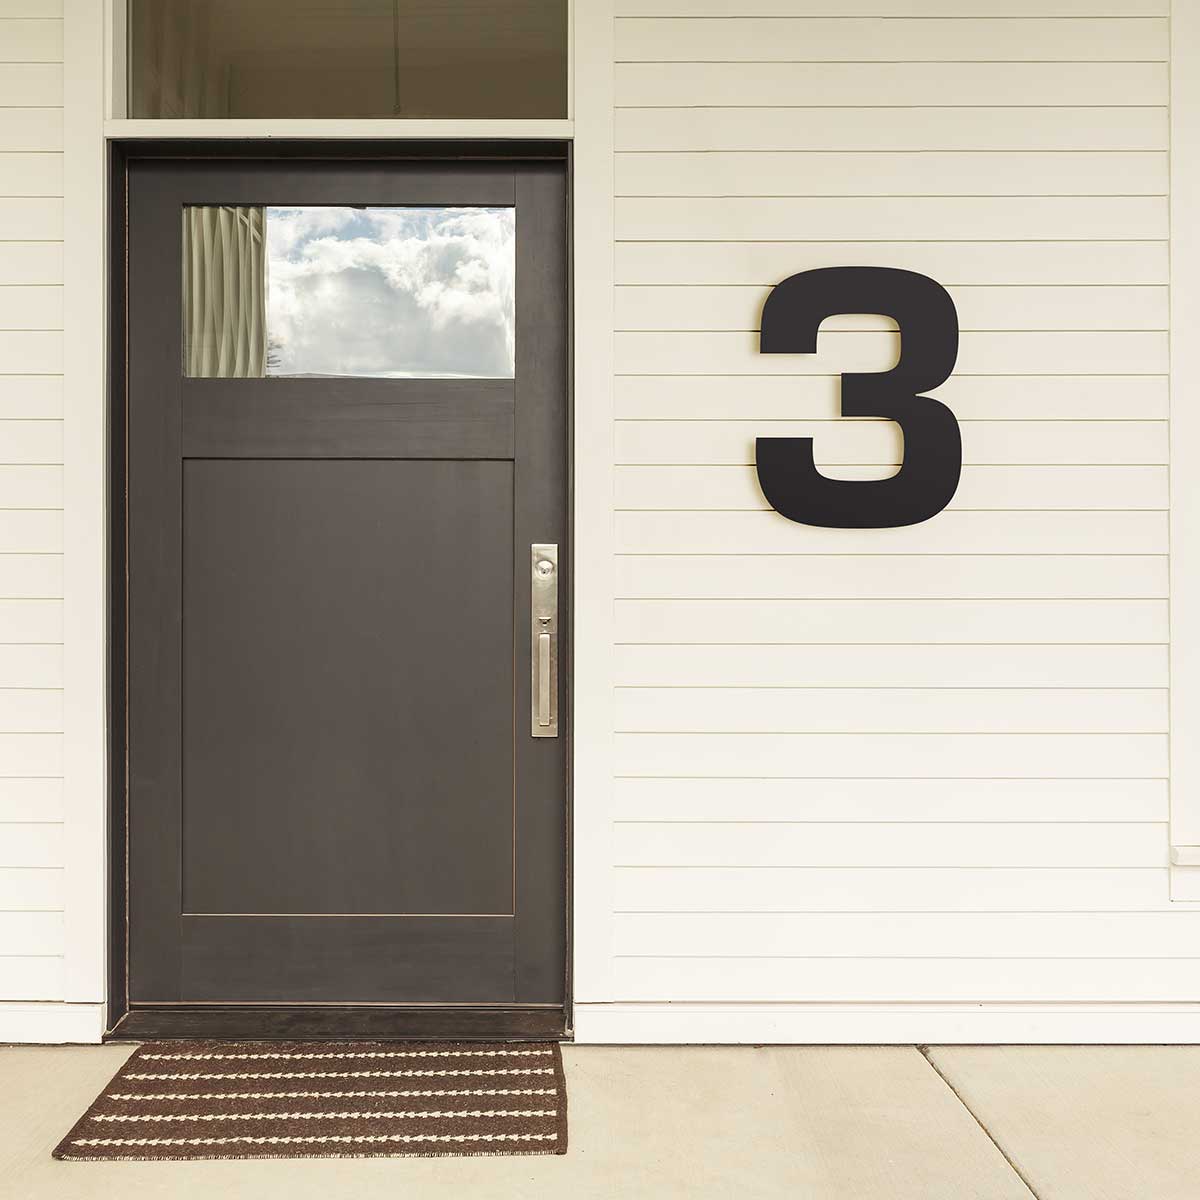 Floating Numbers – Acrylic - Floating House Numbers - floating-numbers-acrylic - HandyBox